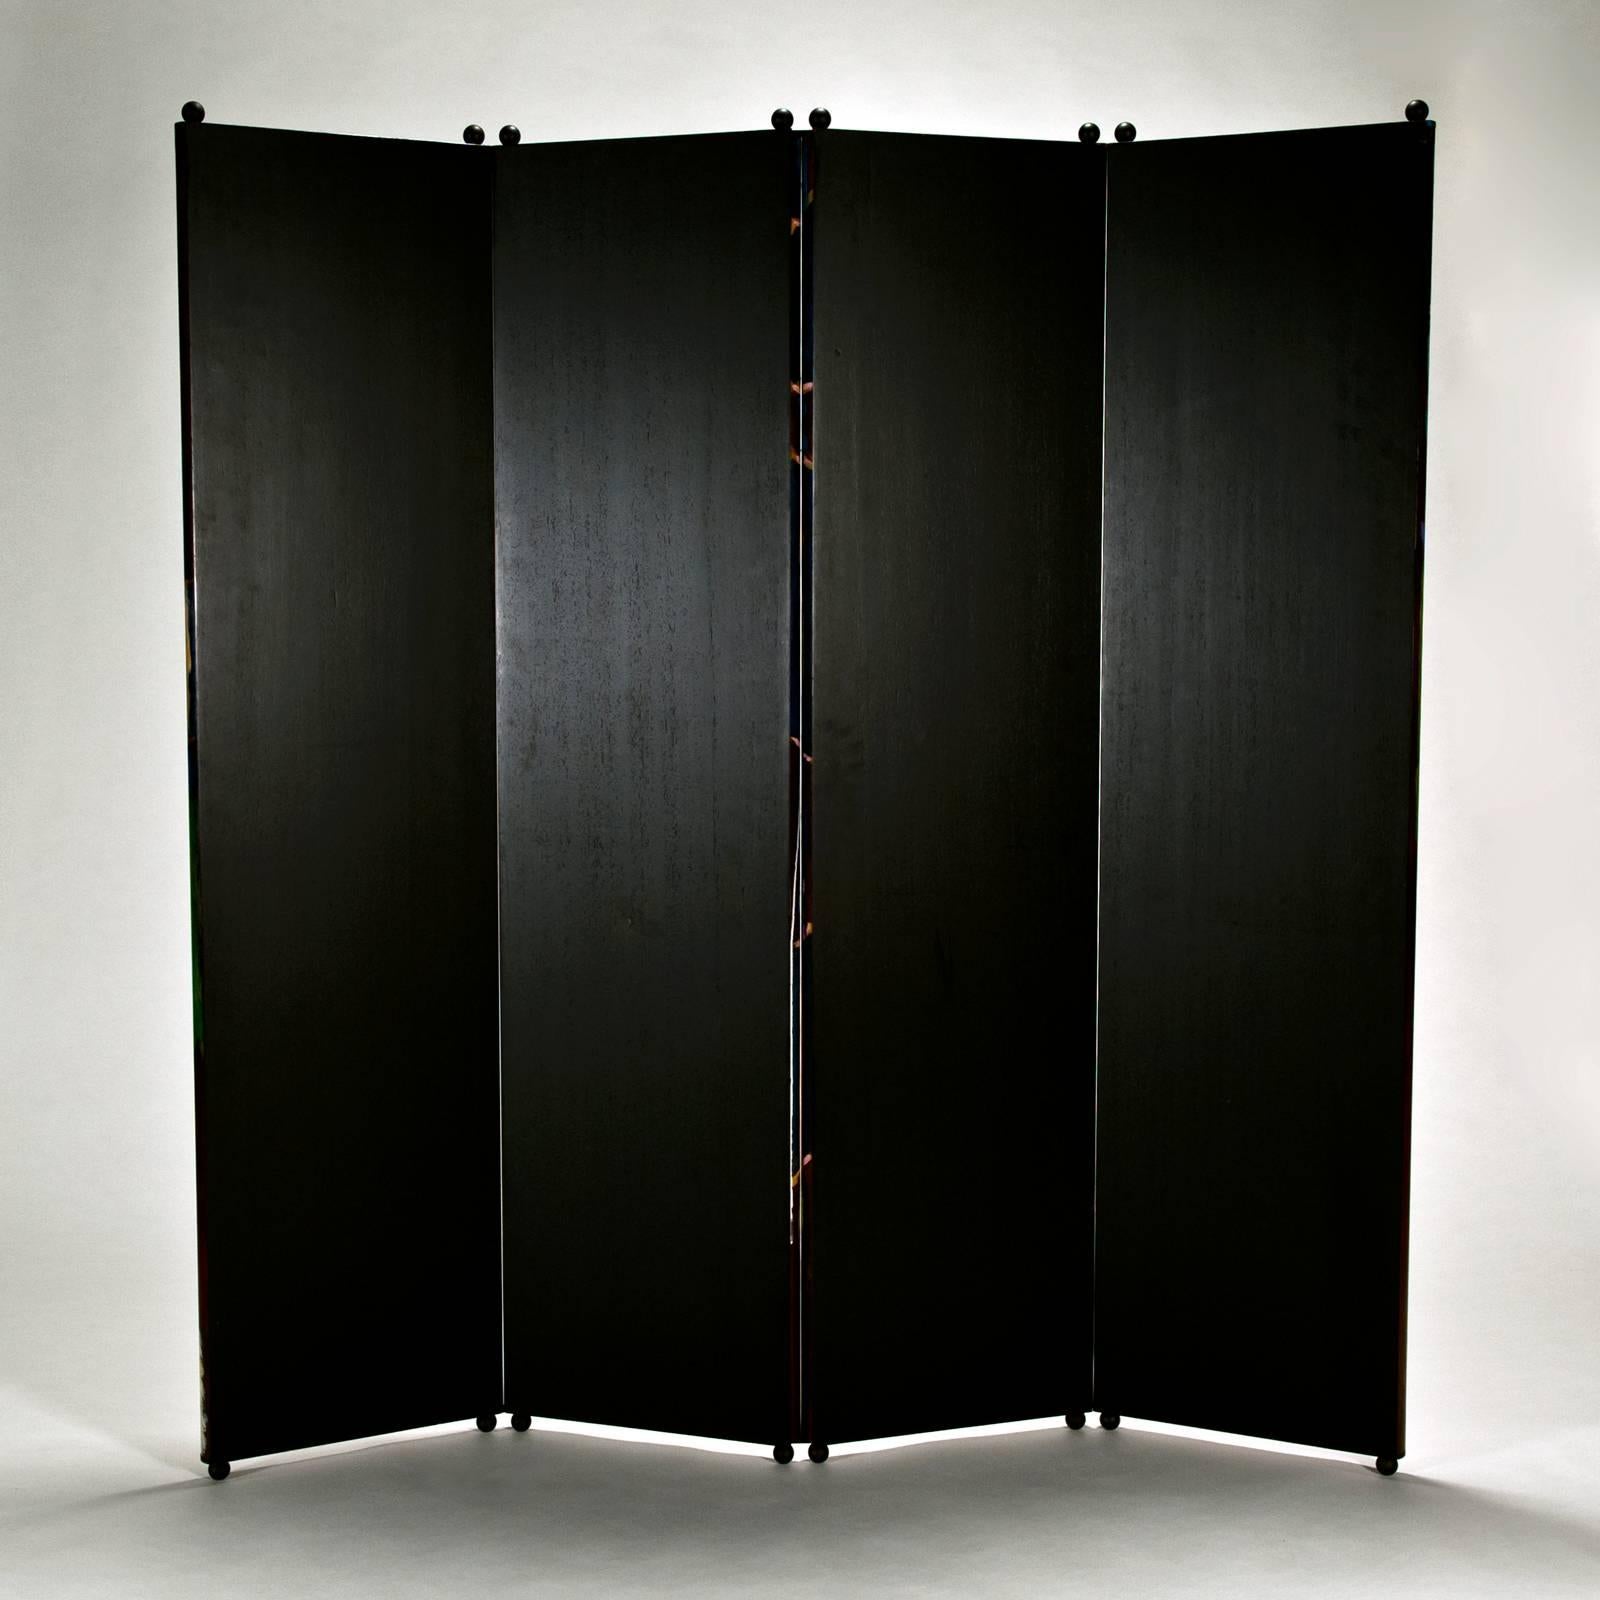 The screen is ingeniously hinged using threaded pins and metal balls, which facilitate easy assembly and leveling. The screen is signed castle 1993 at the bottom in the center of the fourth panel. The back of the screen is stained black. In very